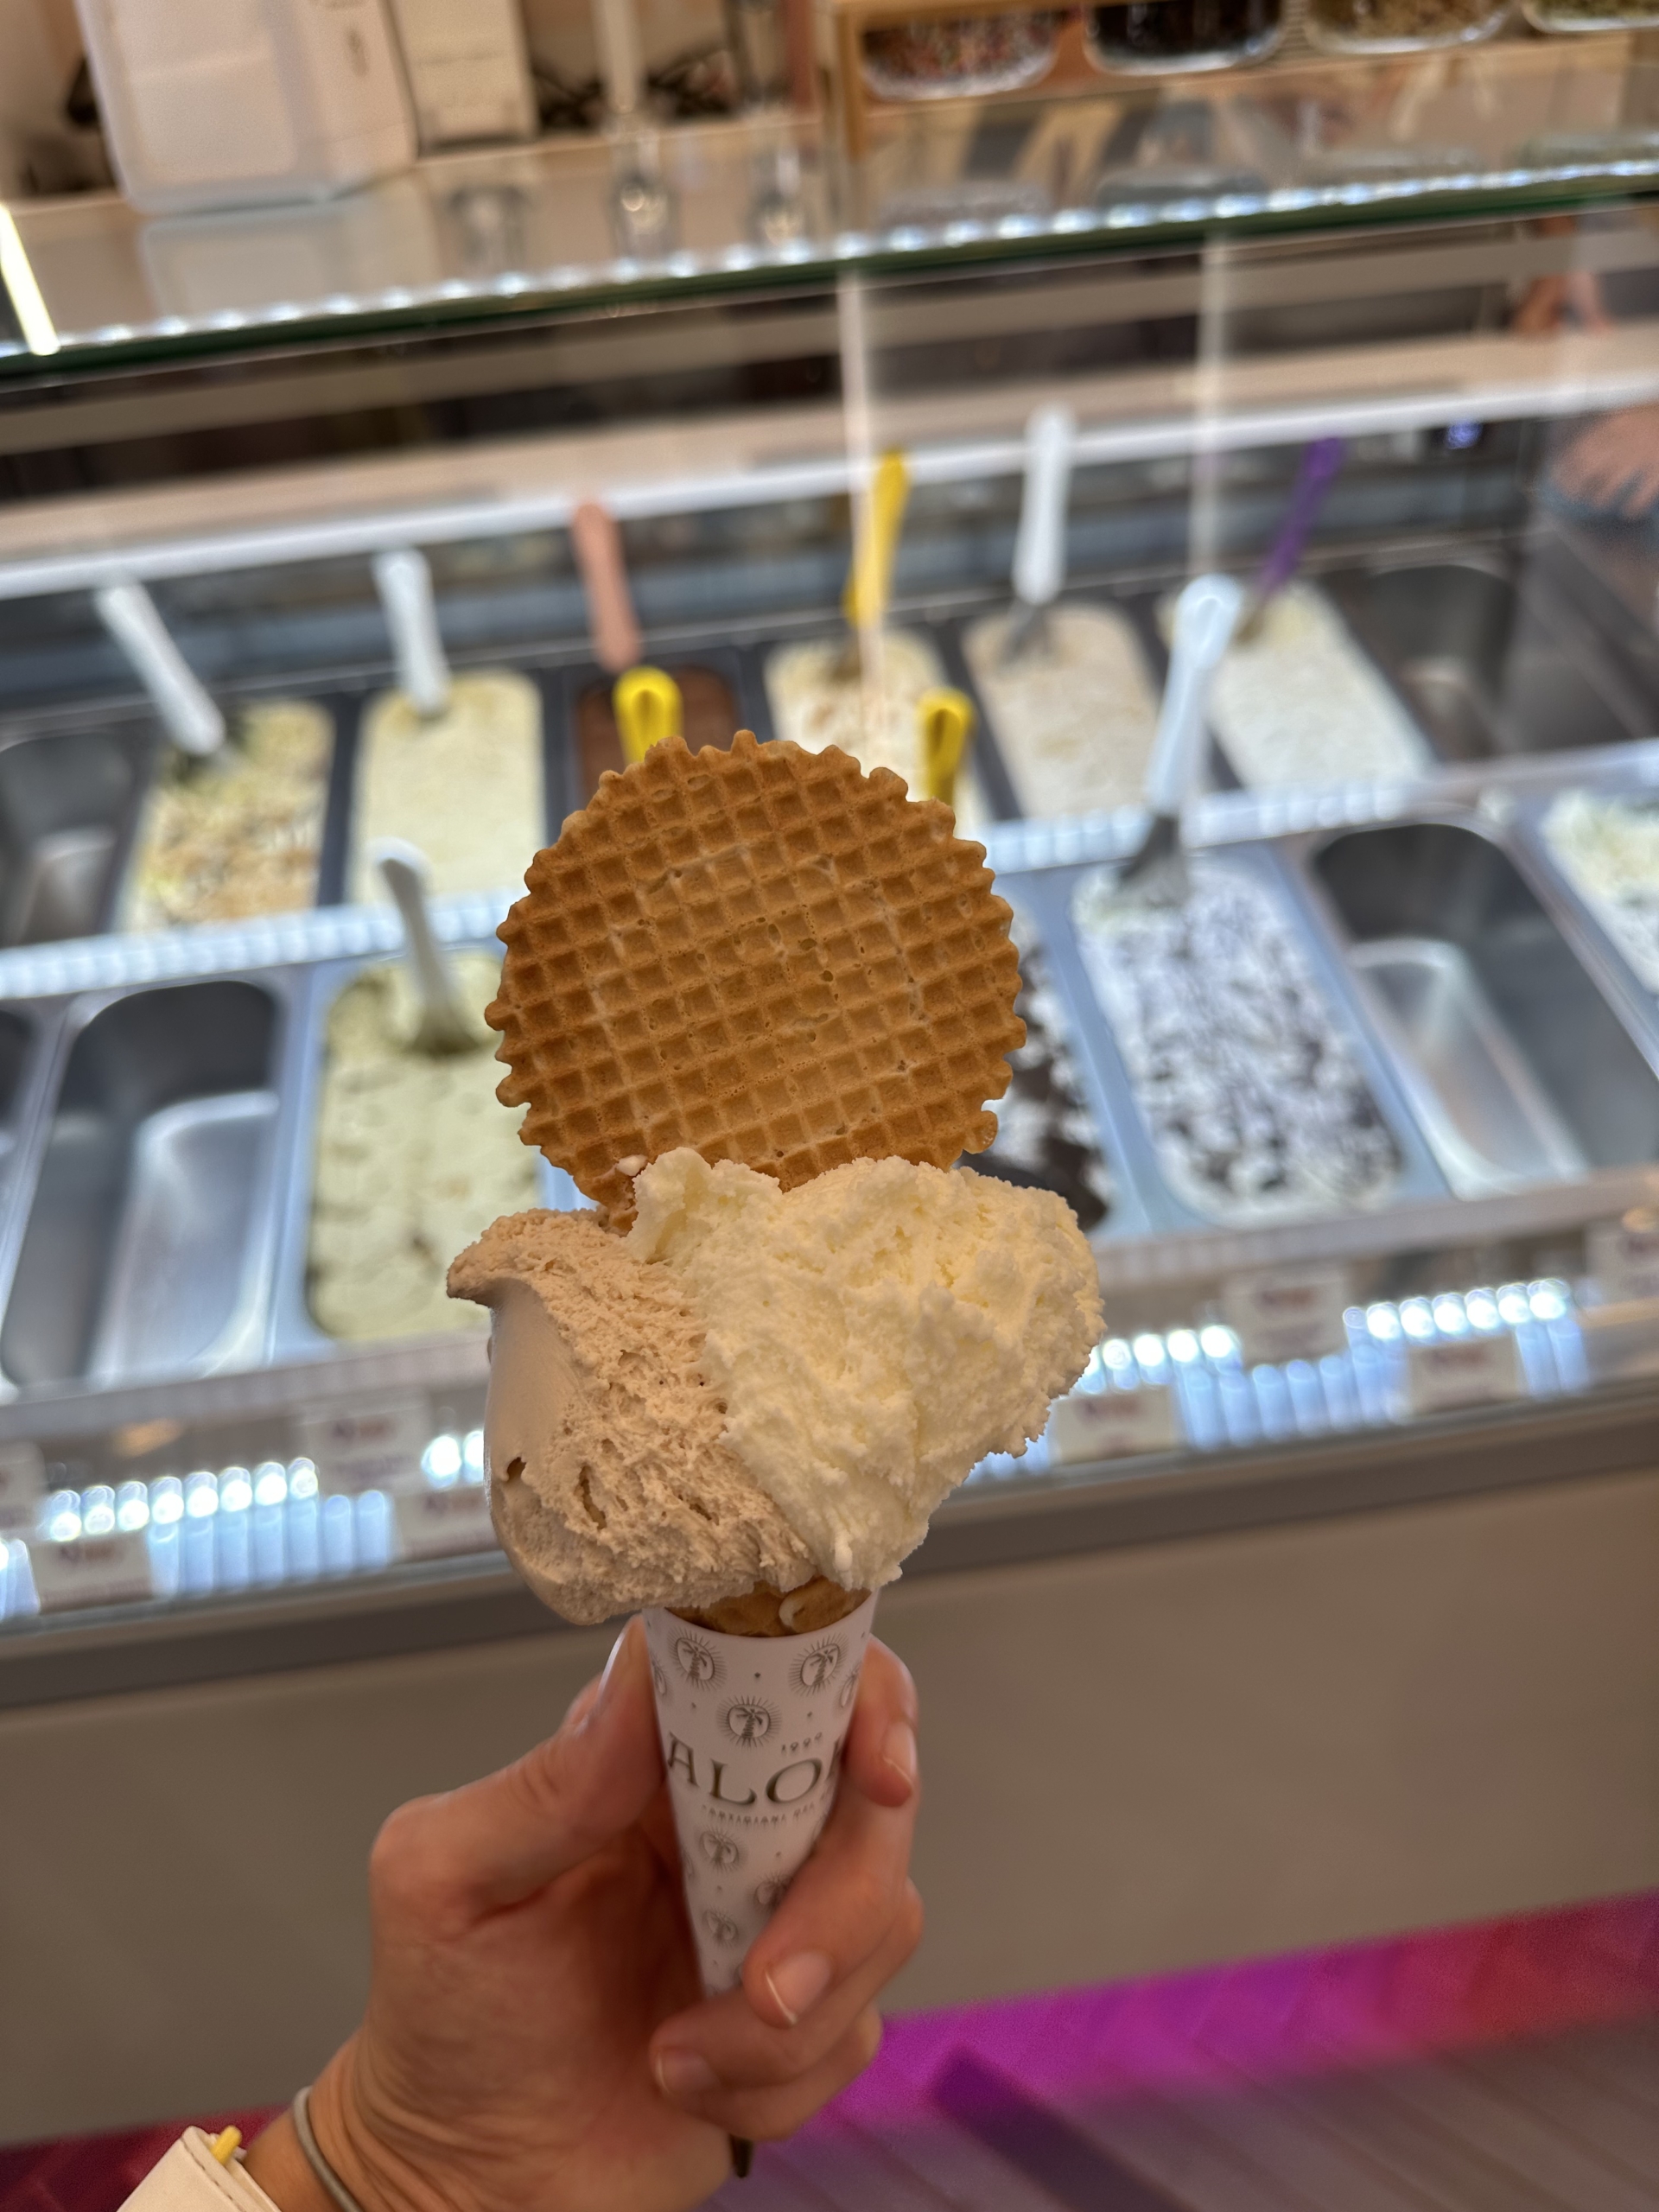 Not ever to be missed when in Italy, time for some gelato!